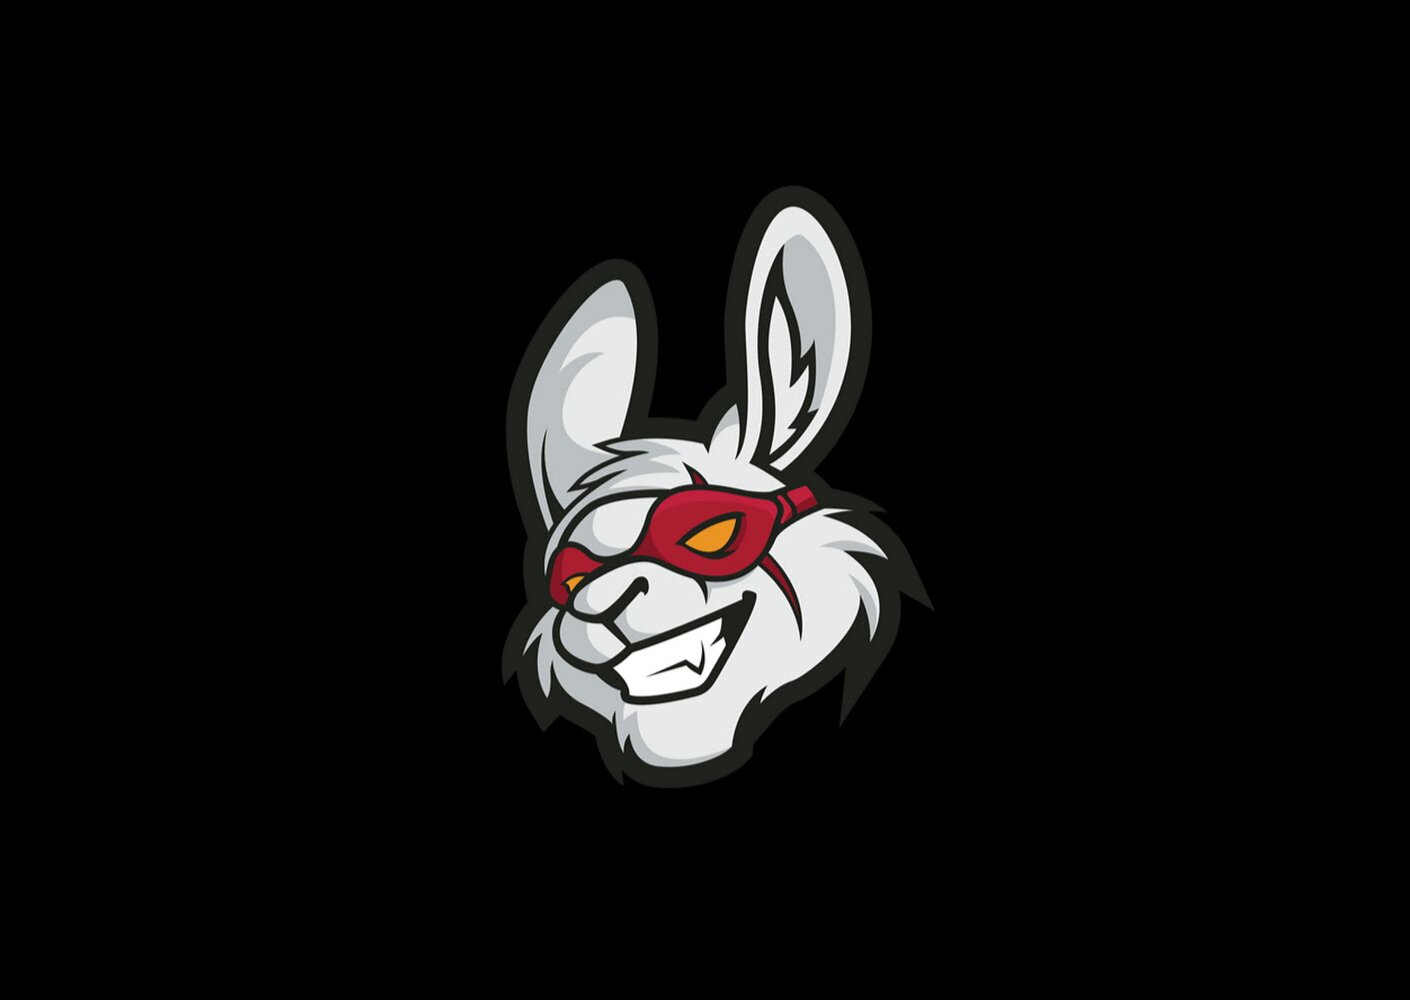 Misfits Gaming announced today they’re bringing back former coach Hussain “Moose” Moosvi as the team’s Interim Coach for the remainder of the Split.